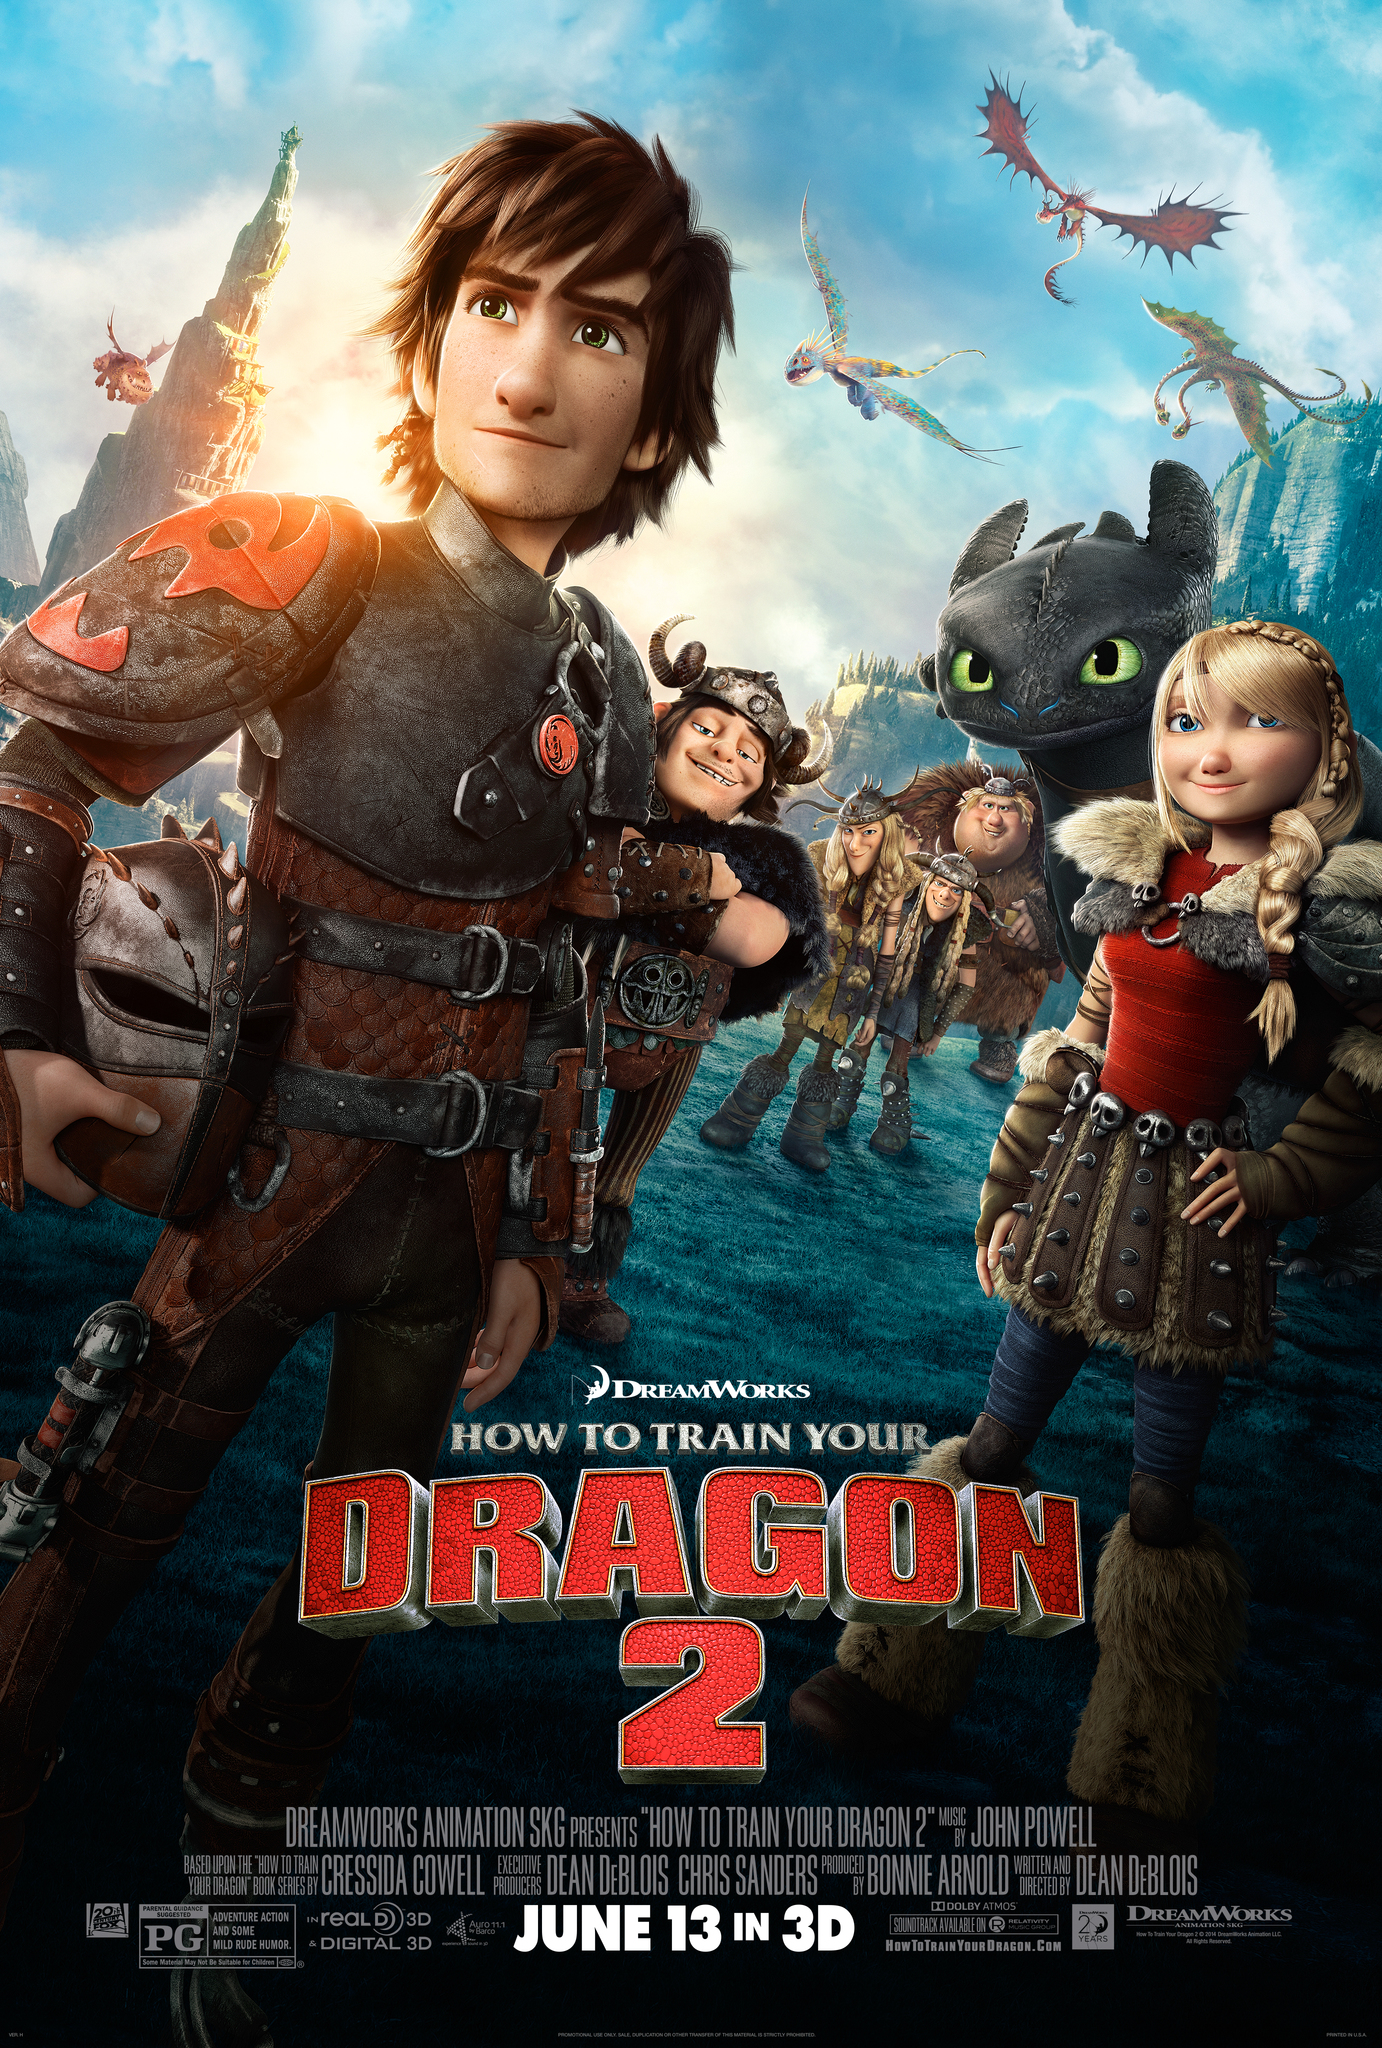 How to Train Your Dragon 2 (2014) Anime MP4 Movie